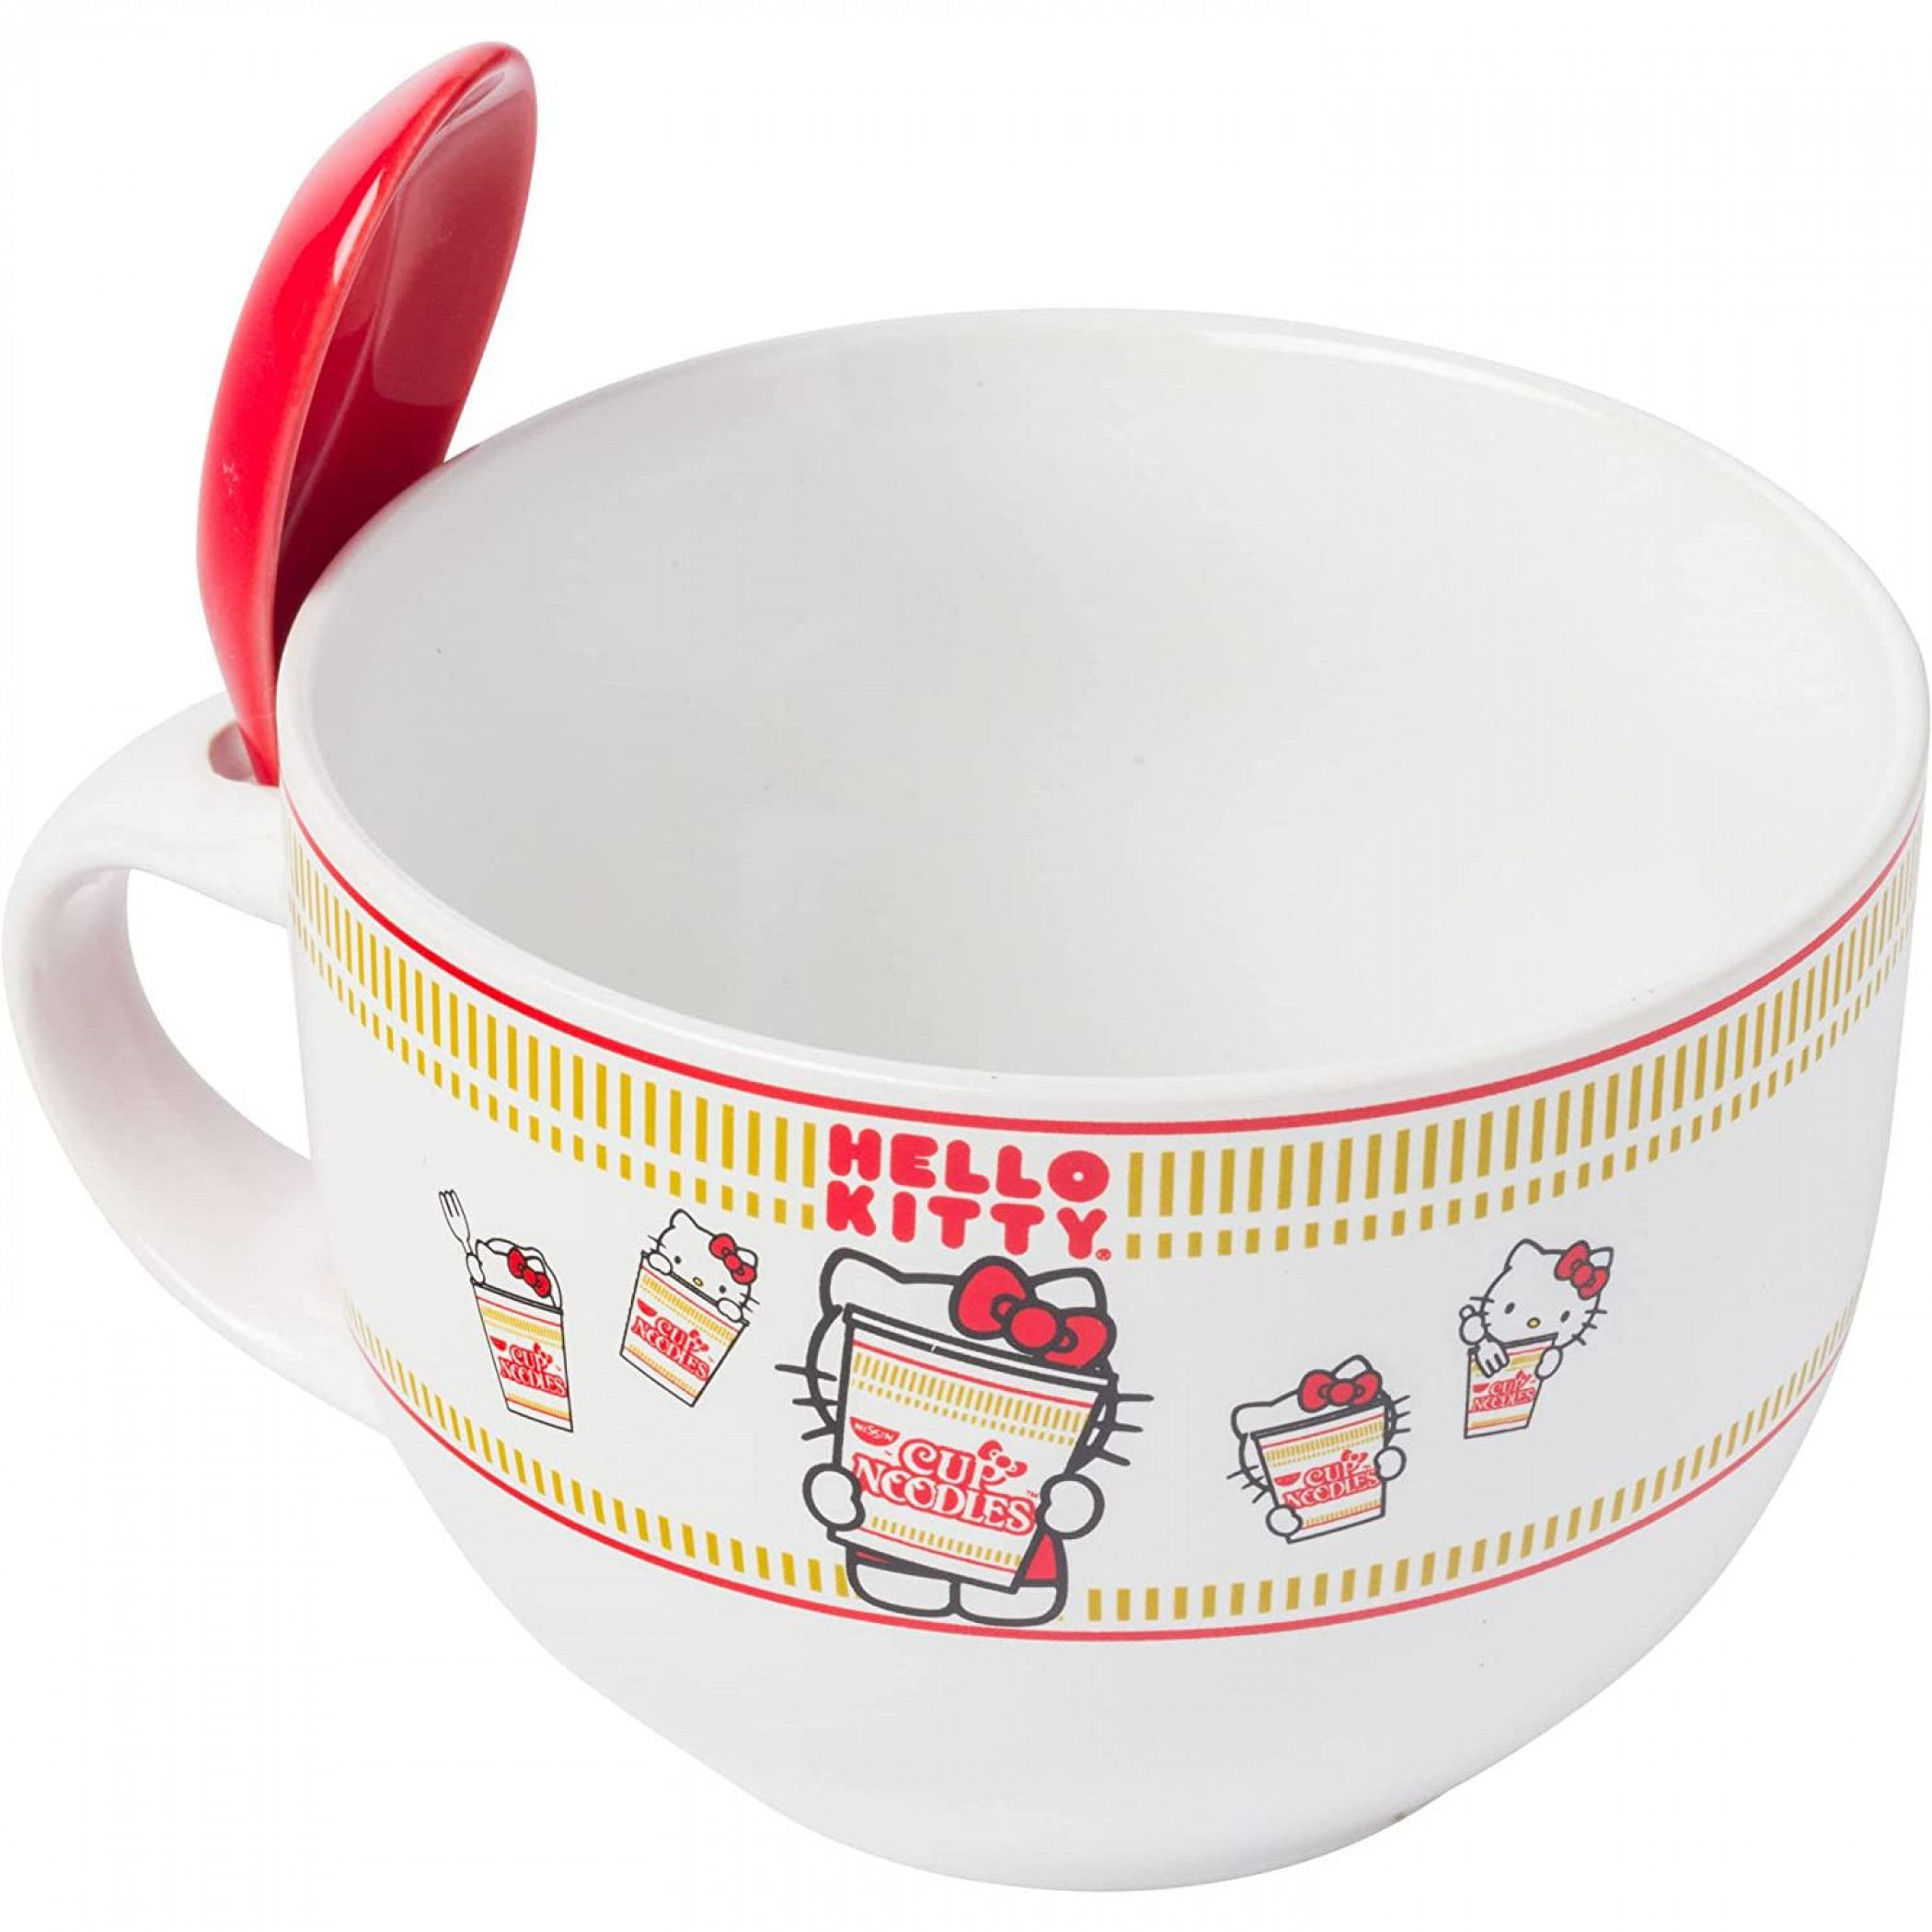 Hello Kitty X Cup Noodles Ceramic Soup Mug with Spoon